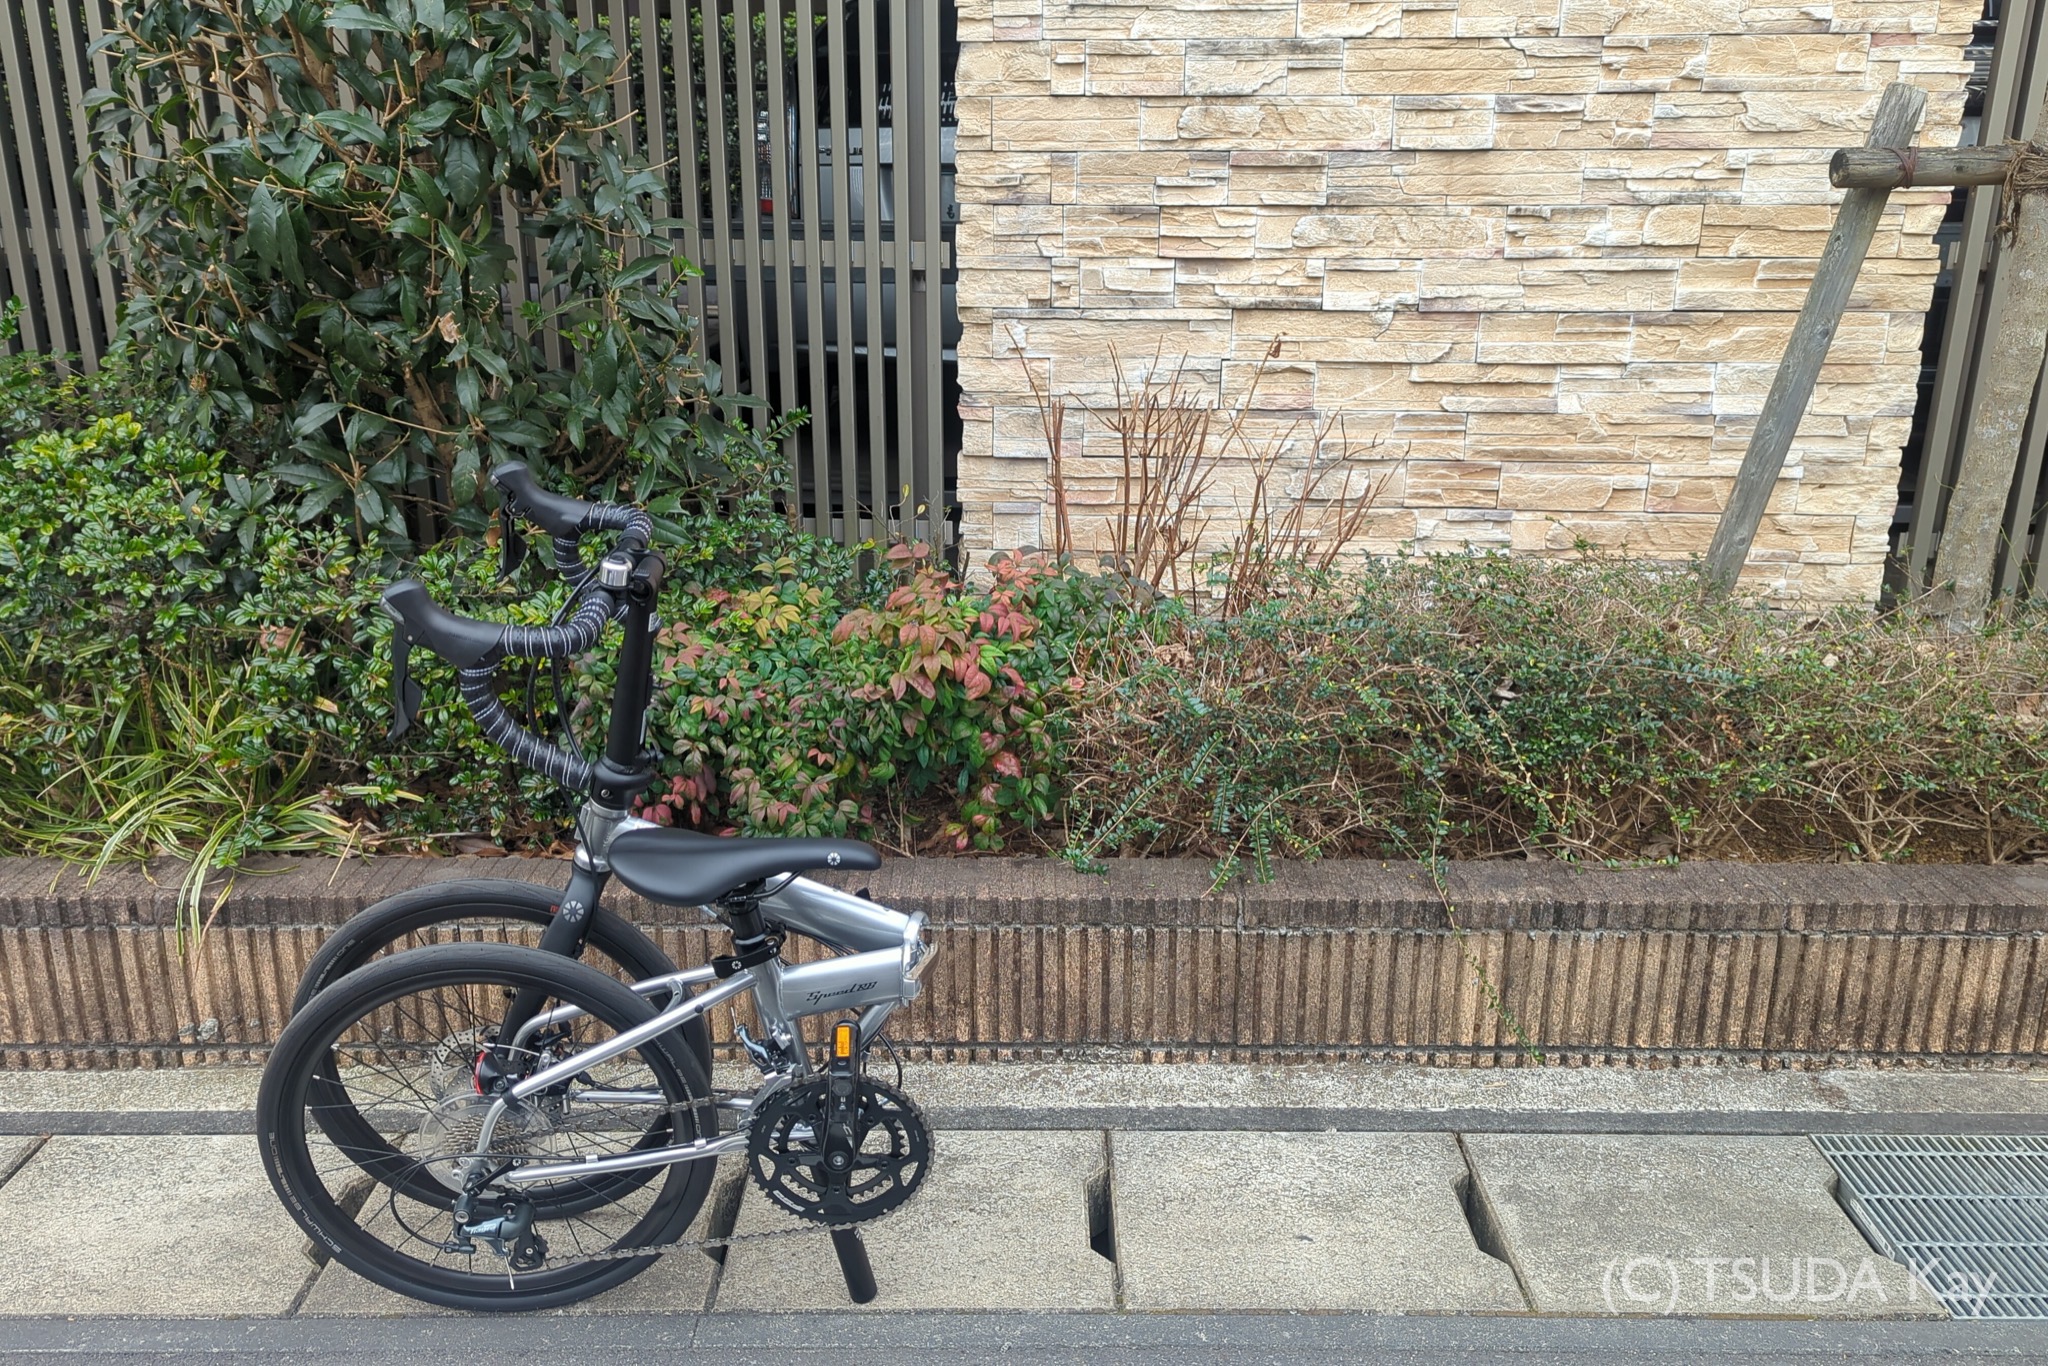 Dahon speed rb depth in review 1